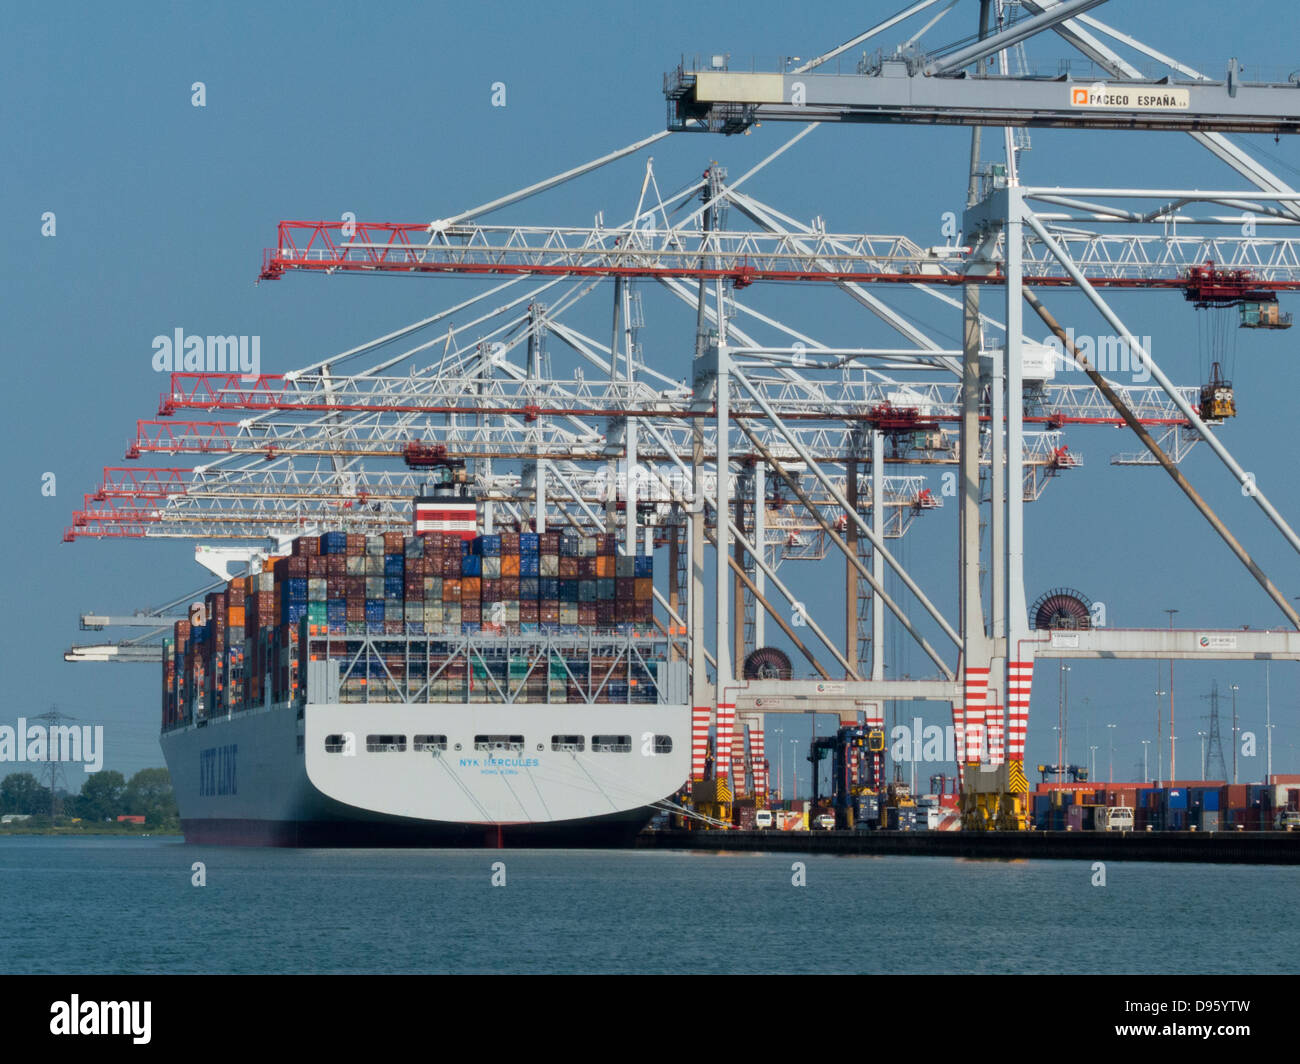 Southampton Container Port large terminal handling ships cranes cargo export import huge big massive scale tall high River Test Stock Photo